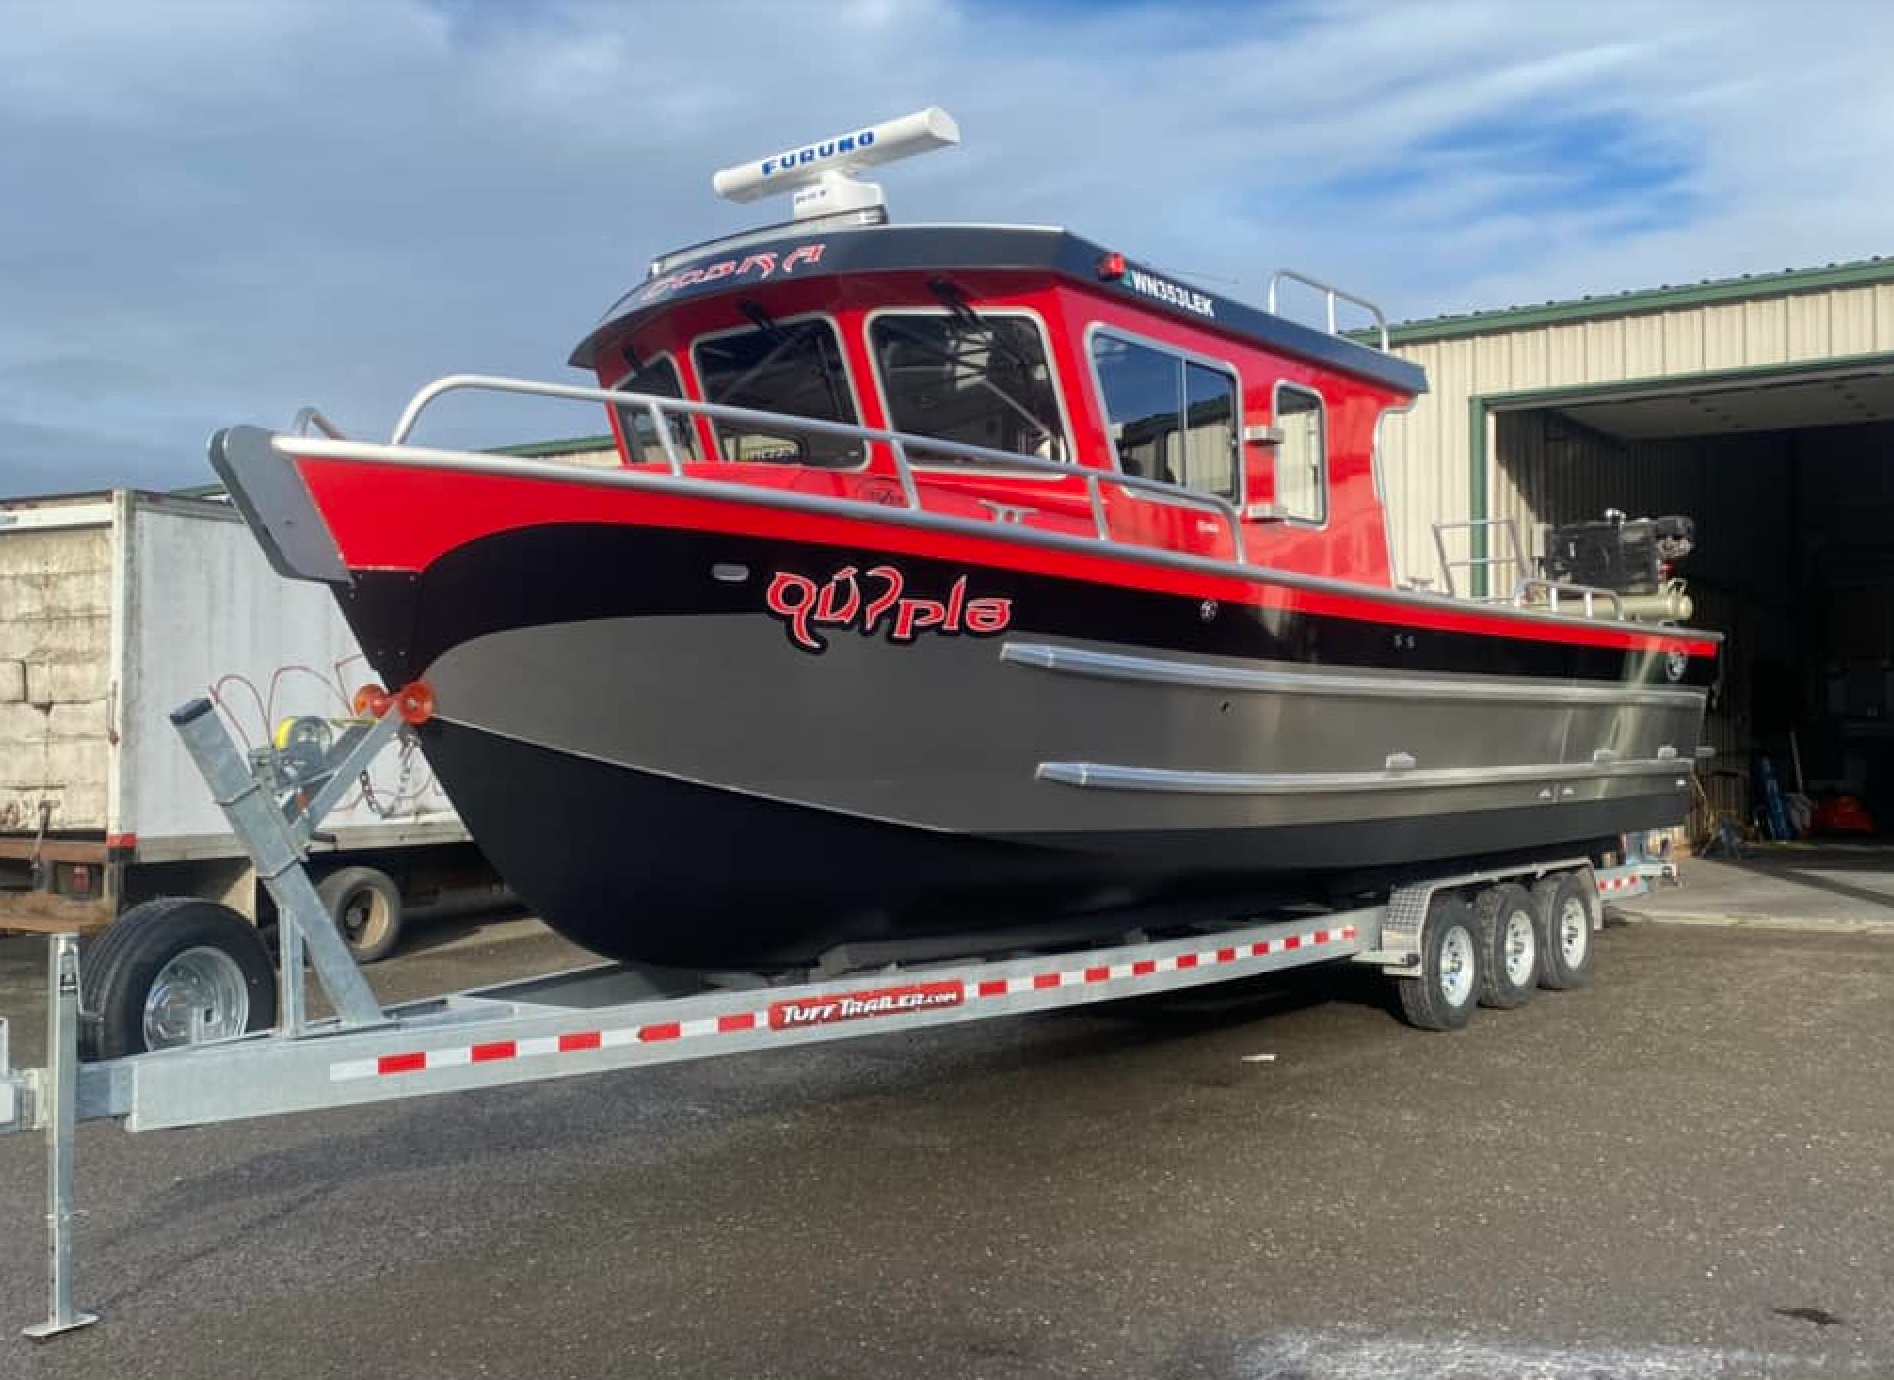 New boat does it all on waters off Washington's Olympic Peninsula